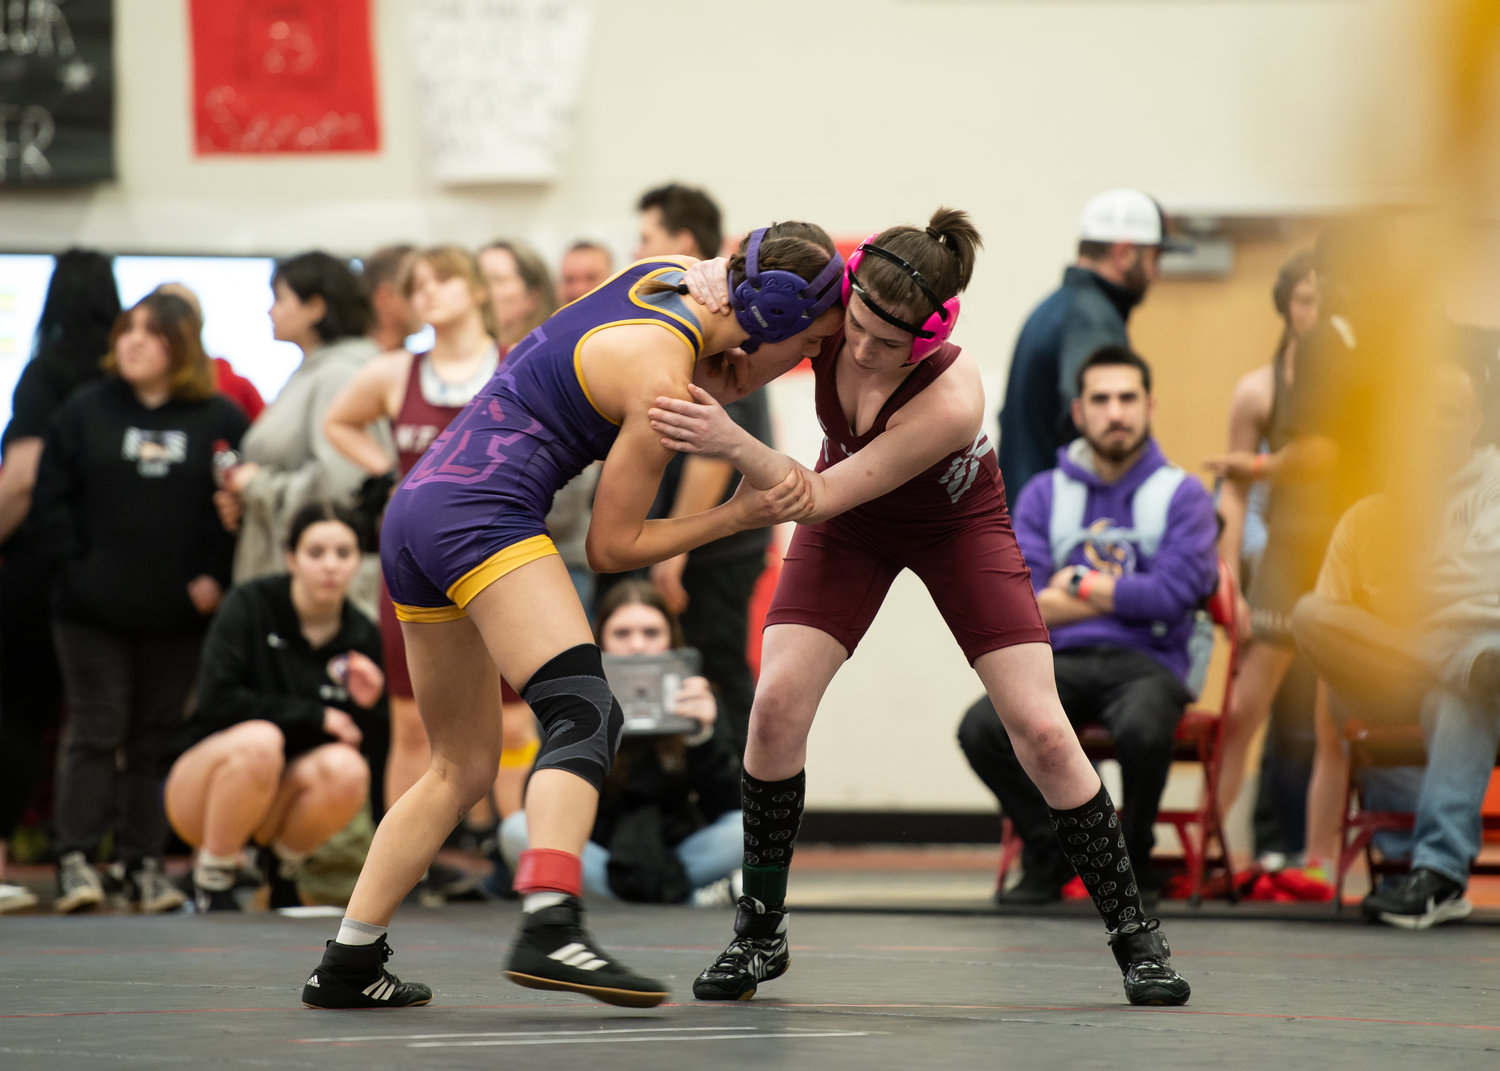 W.F. West's Shelby Hazlett wrestles with Columbia River's Nolin Darling Saturday afternoon at the 1B/2B/1A/2A Regional in Shelton.